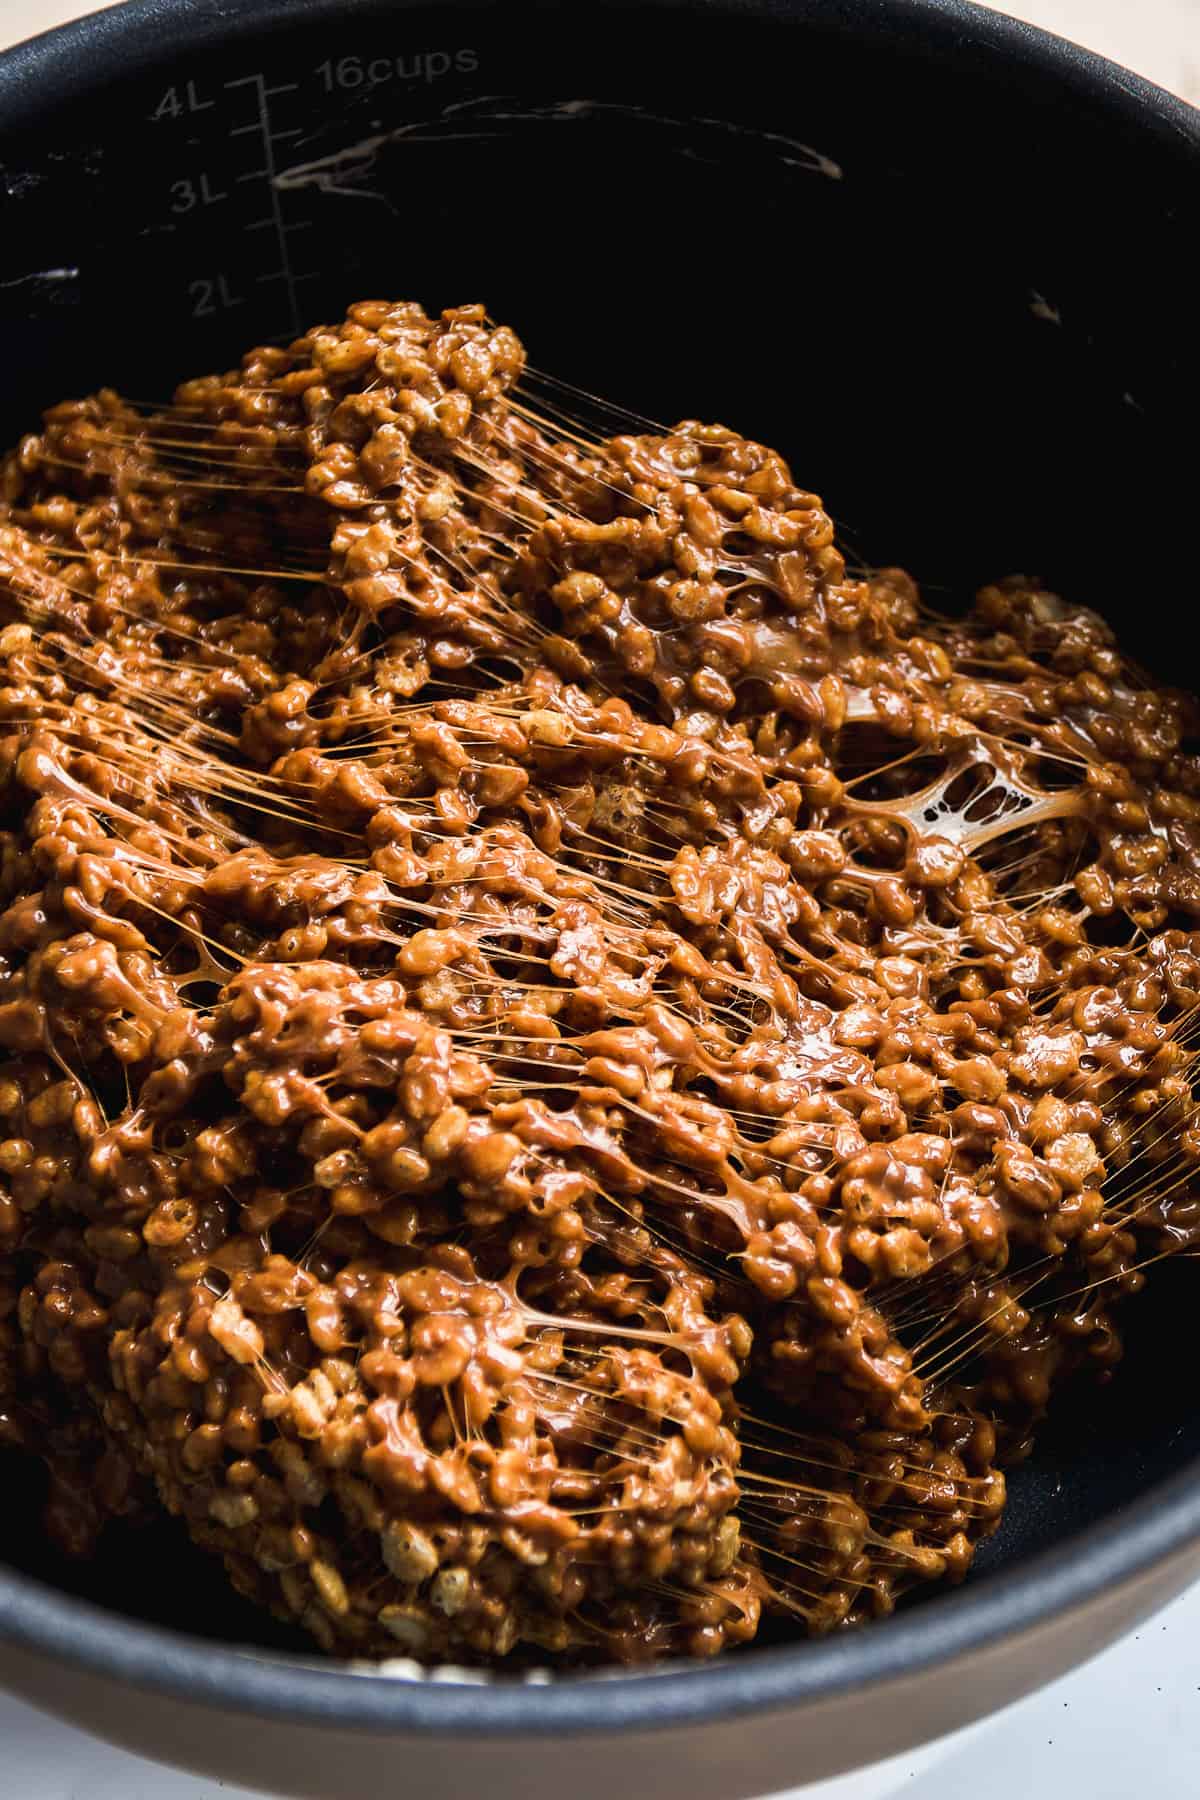 Chocolate sunflower butter rice krispies being mixed in a black pot.